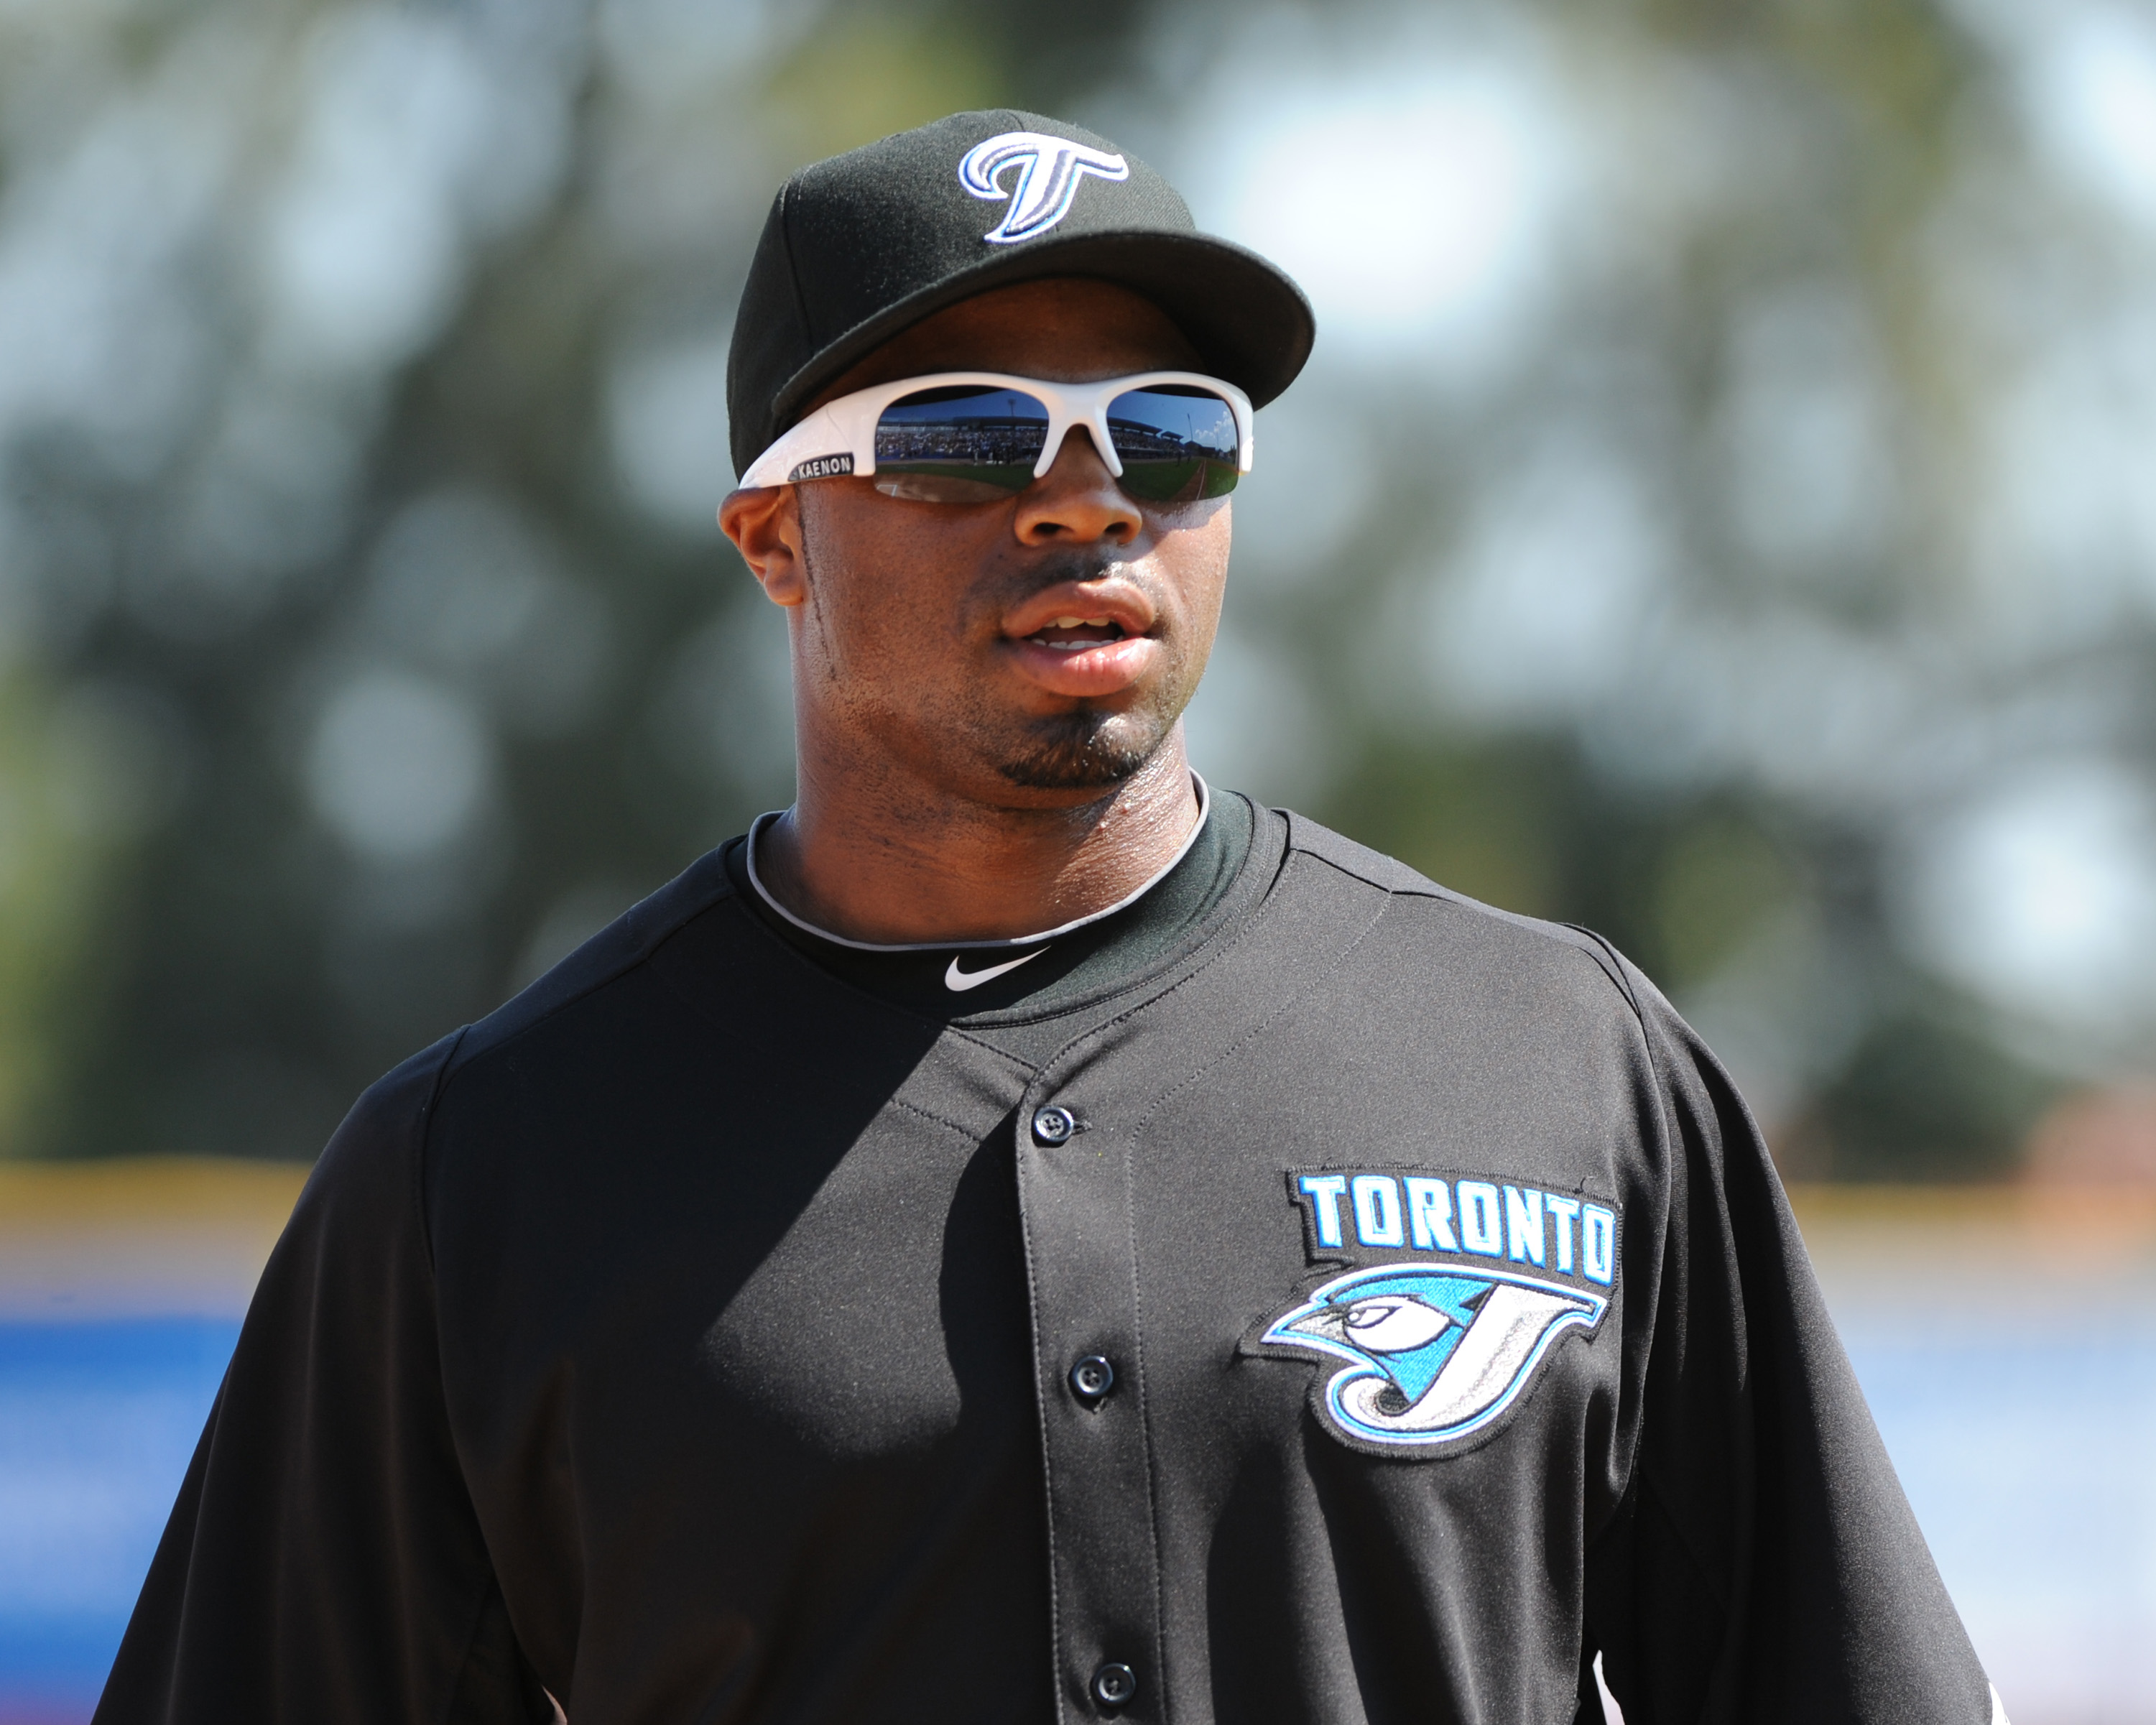 DUNEDIN, FL - FEBRUARY 26:  Outfielder Rajai Davis #11 of the Toronto Blue Jays warms up for play against the Detroit Tigers February 26, 2011 at Florida Auto Exchange Stadium in Dunedin, Florida.  (Photo by Al Messerschmidt/Getty Images)